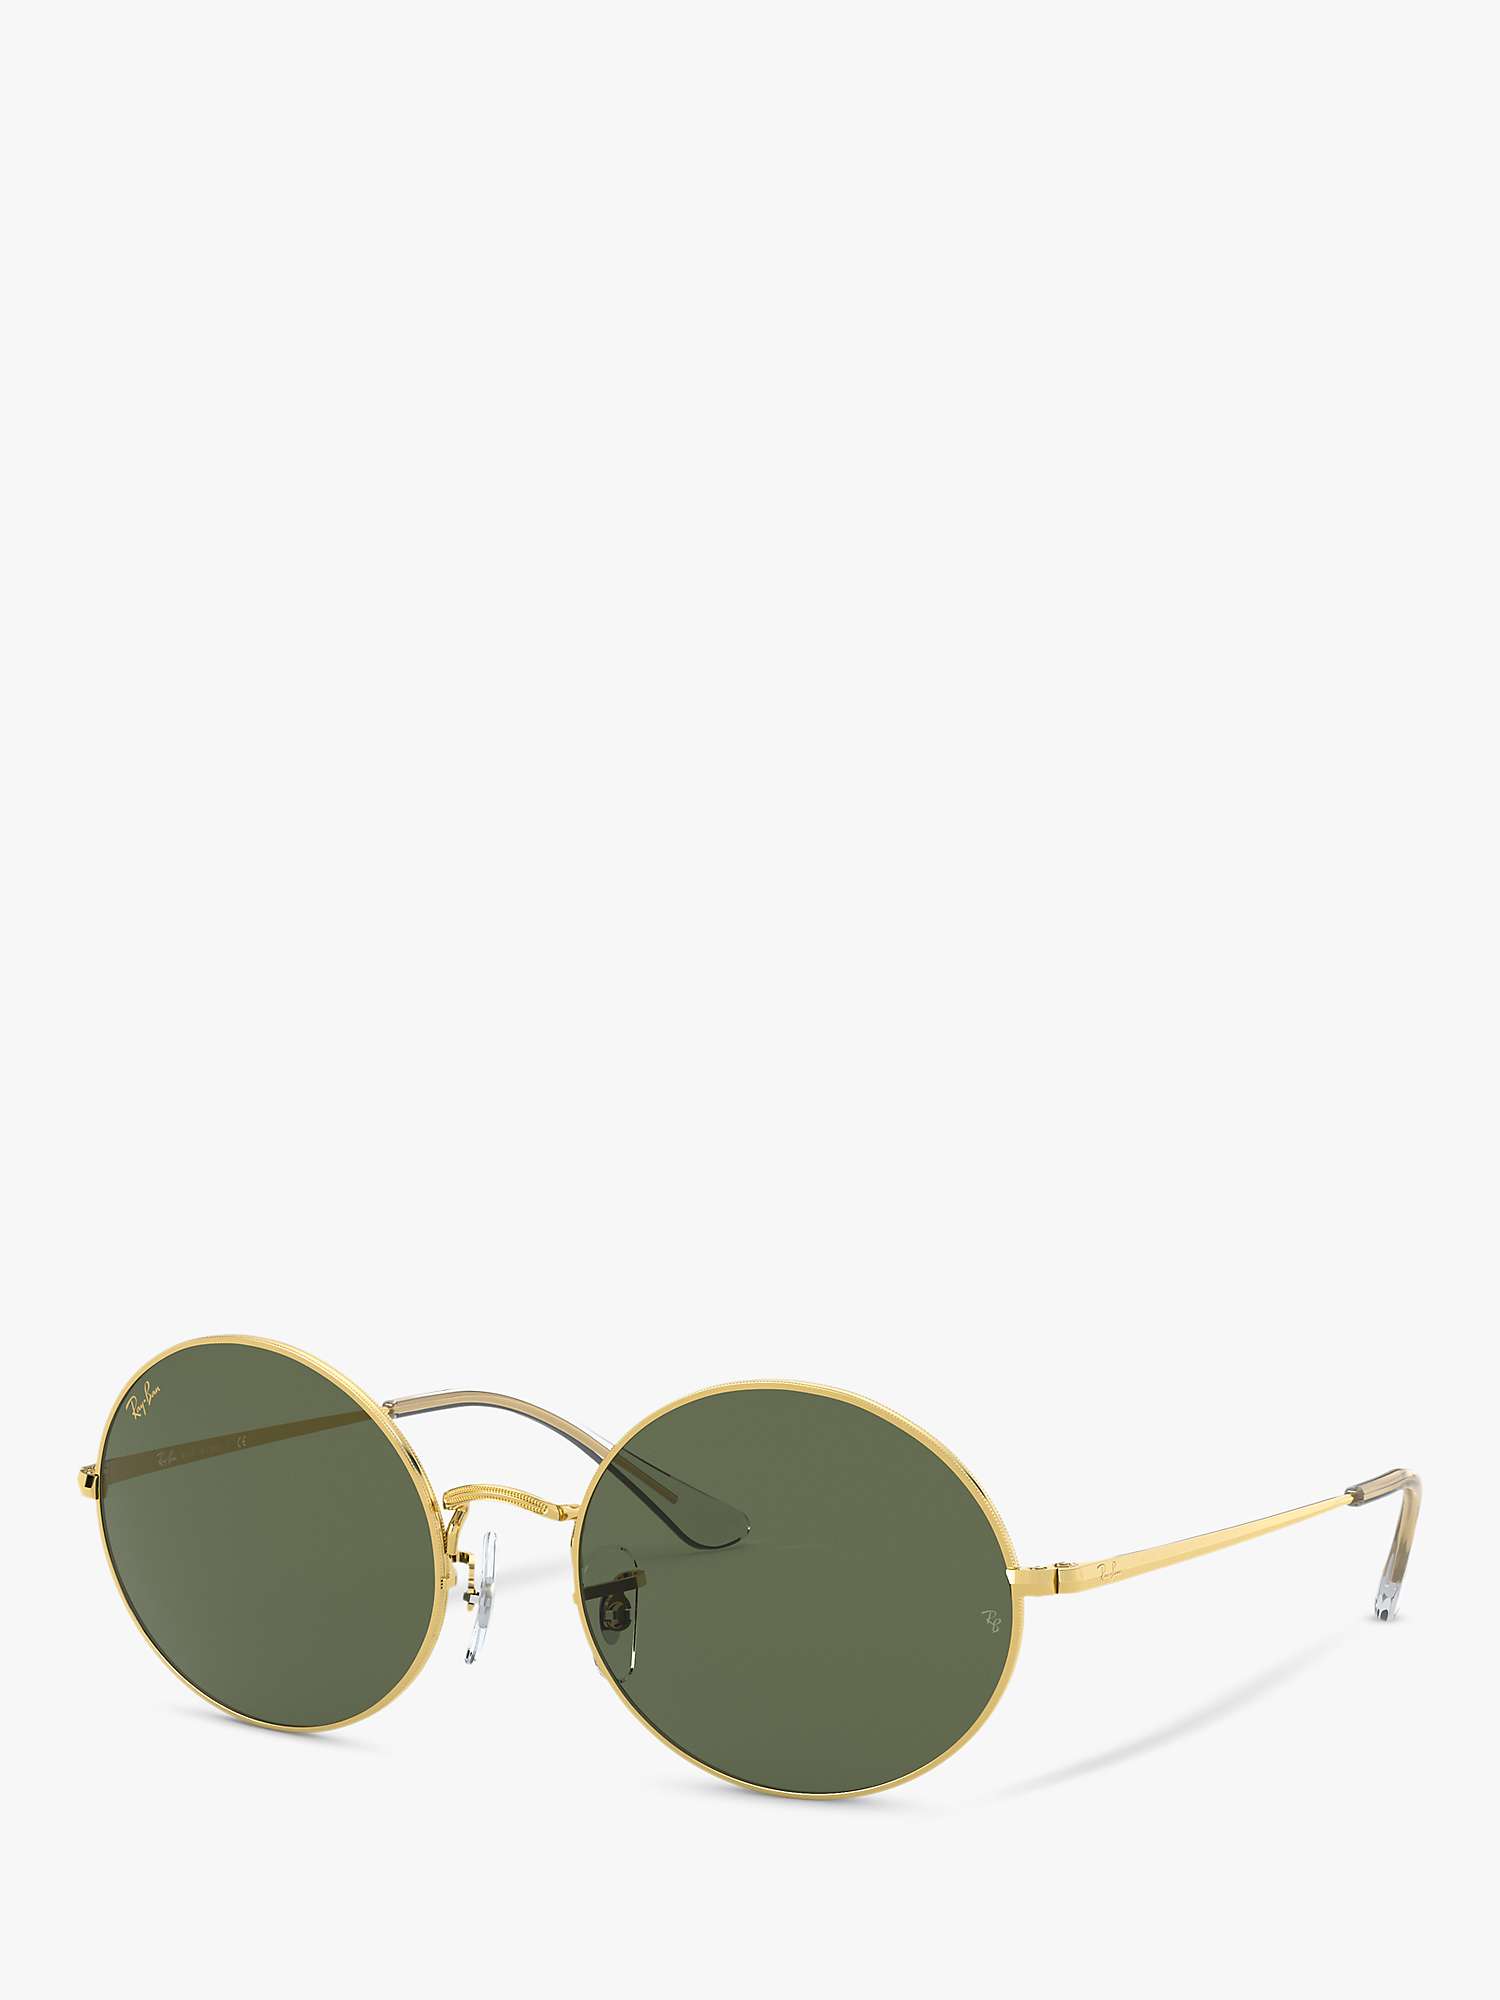 Buy Ray-Ban RB1970 Unisex Oval Sunglasses, Legend Gold/Green Online at johnlewis.com